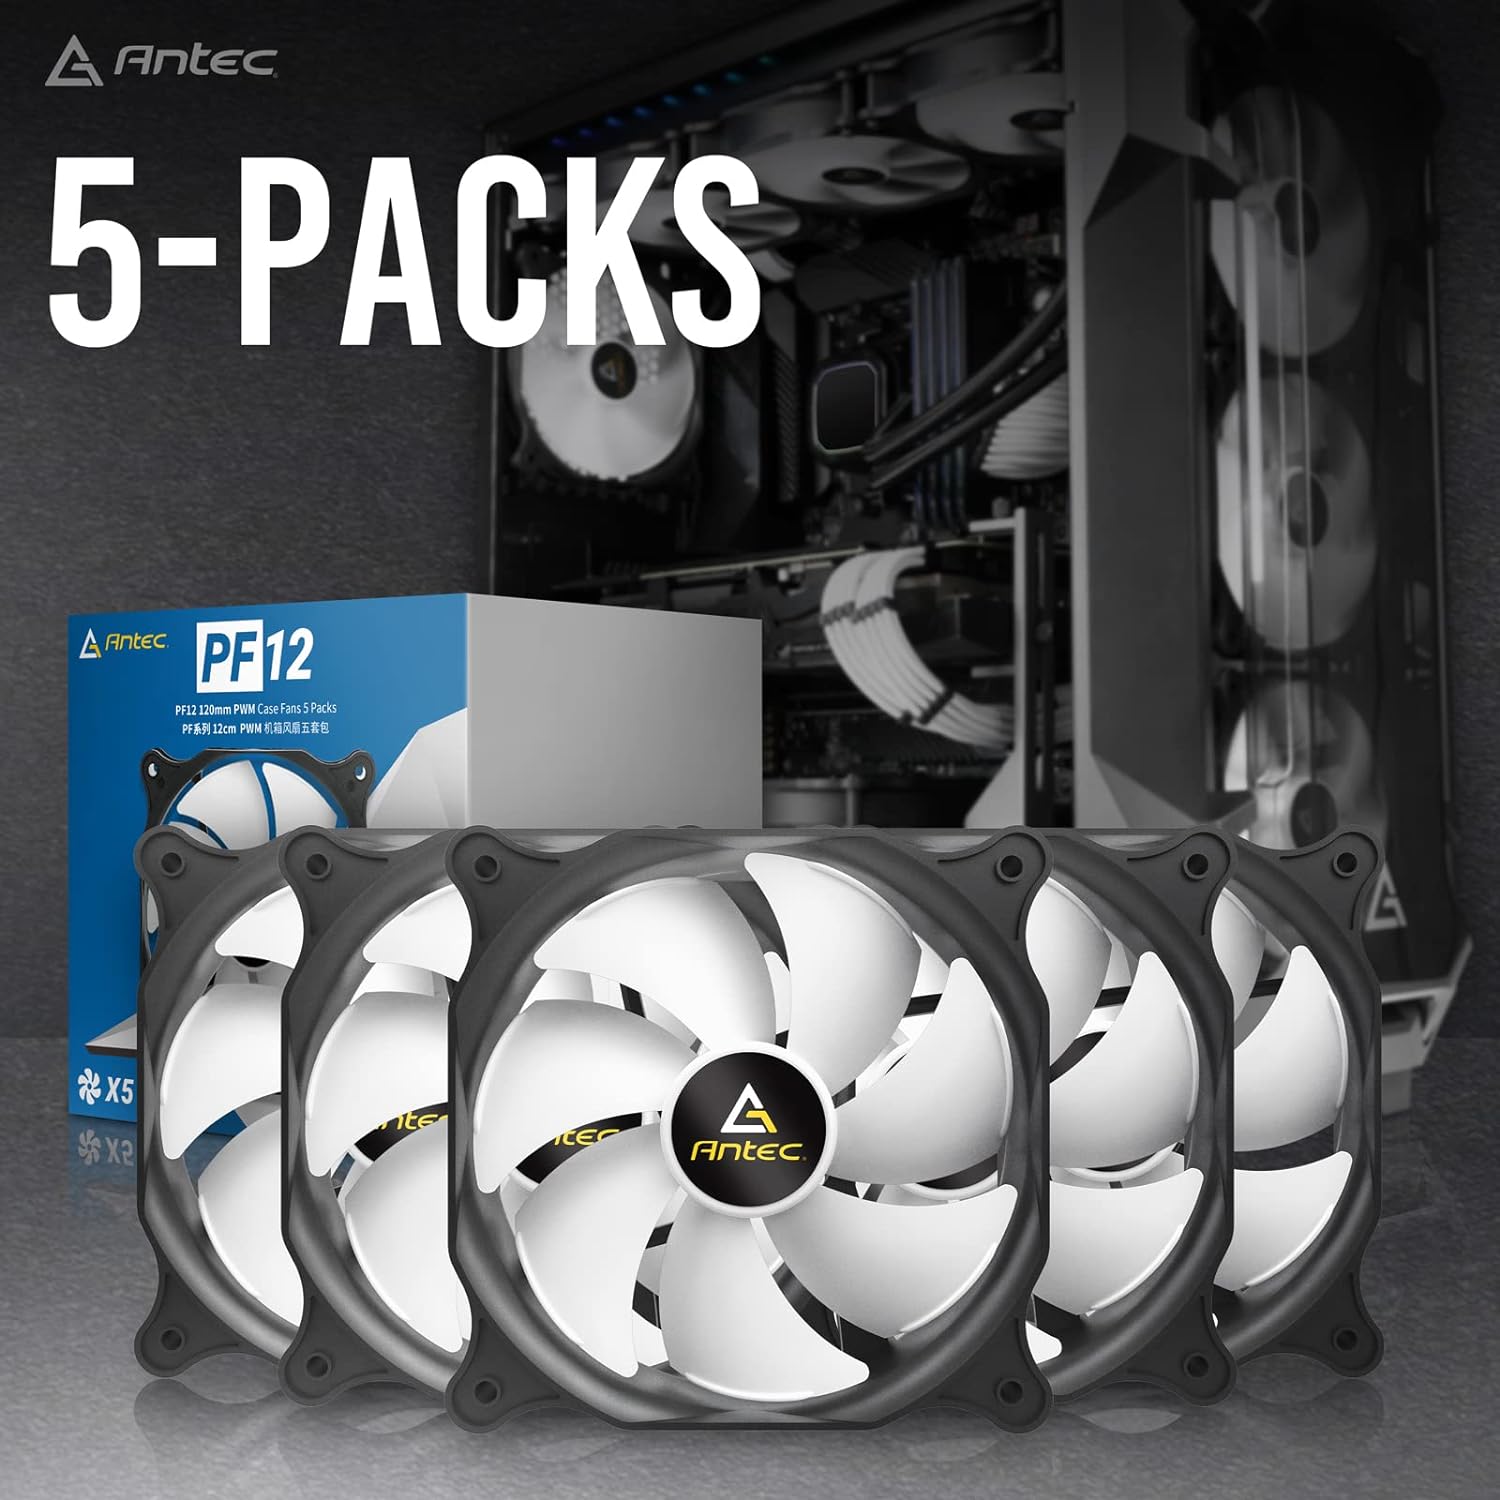 antec 120mm case fan, pc case fan high performance, 3-pin connector, f12 series 5 packs - image 2 of 7